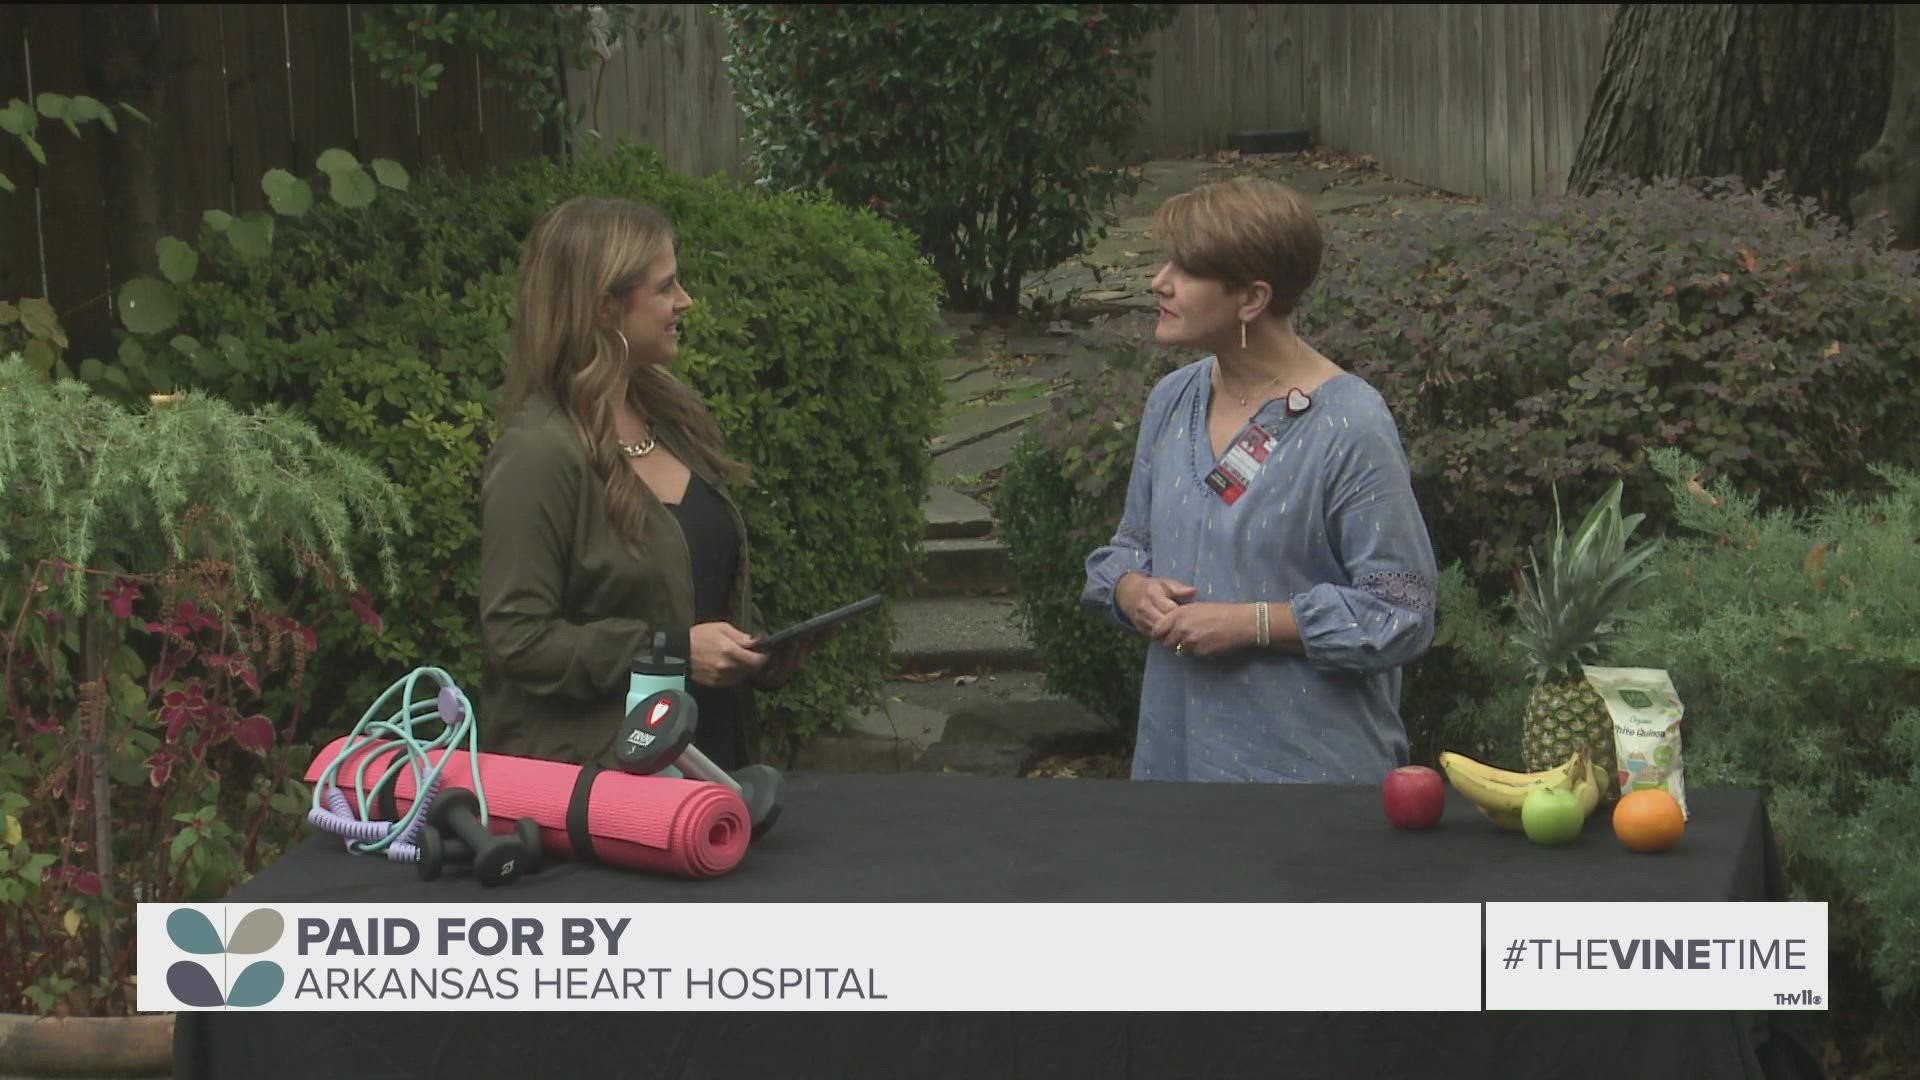 Dr. Beth Crowder explains the difference between Type 1 and Type 2 Diabetes and shares lifestyle choices that can help reduce your risk for heart disease.